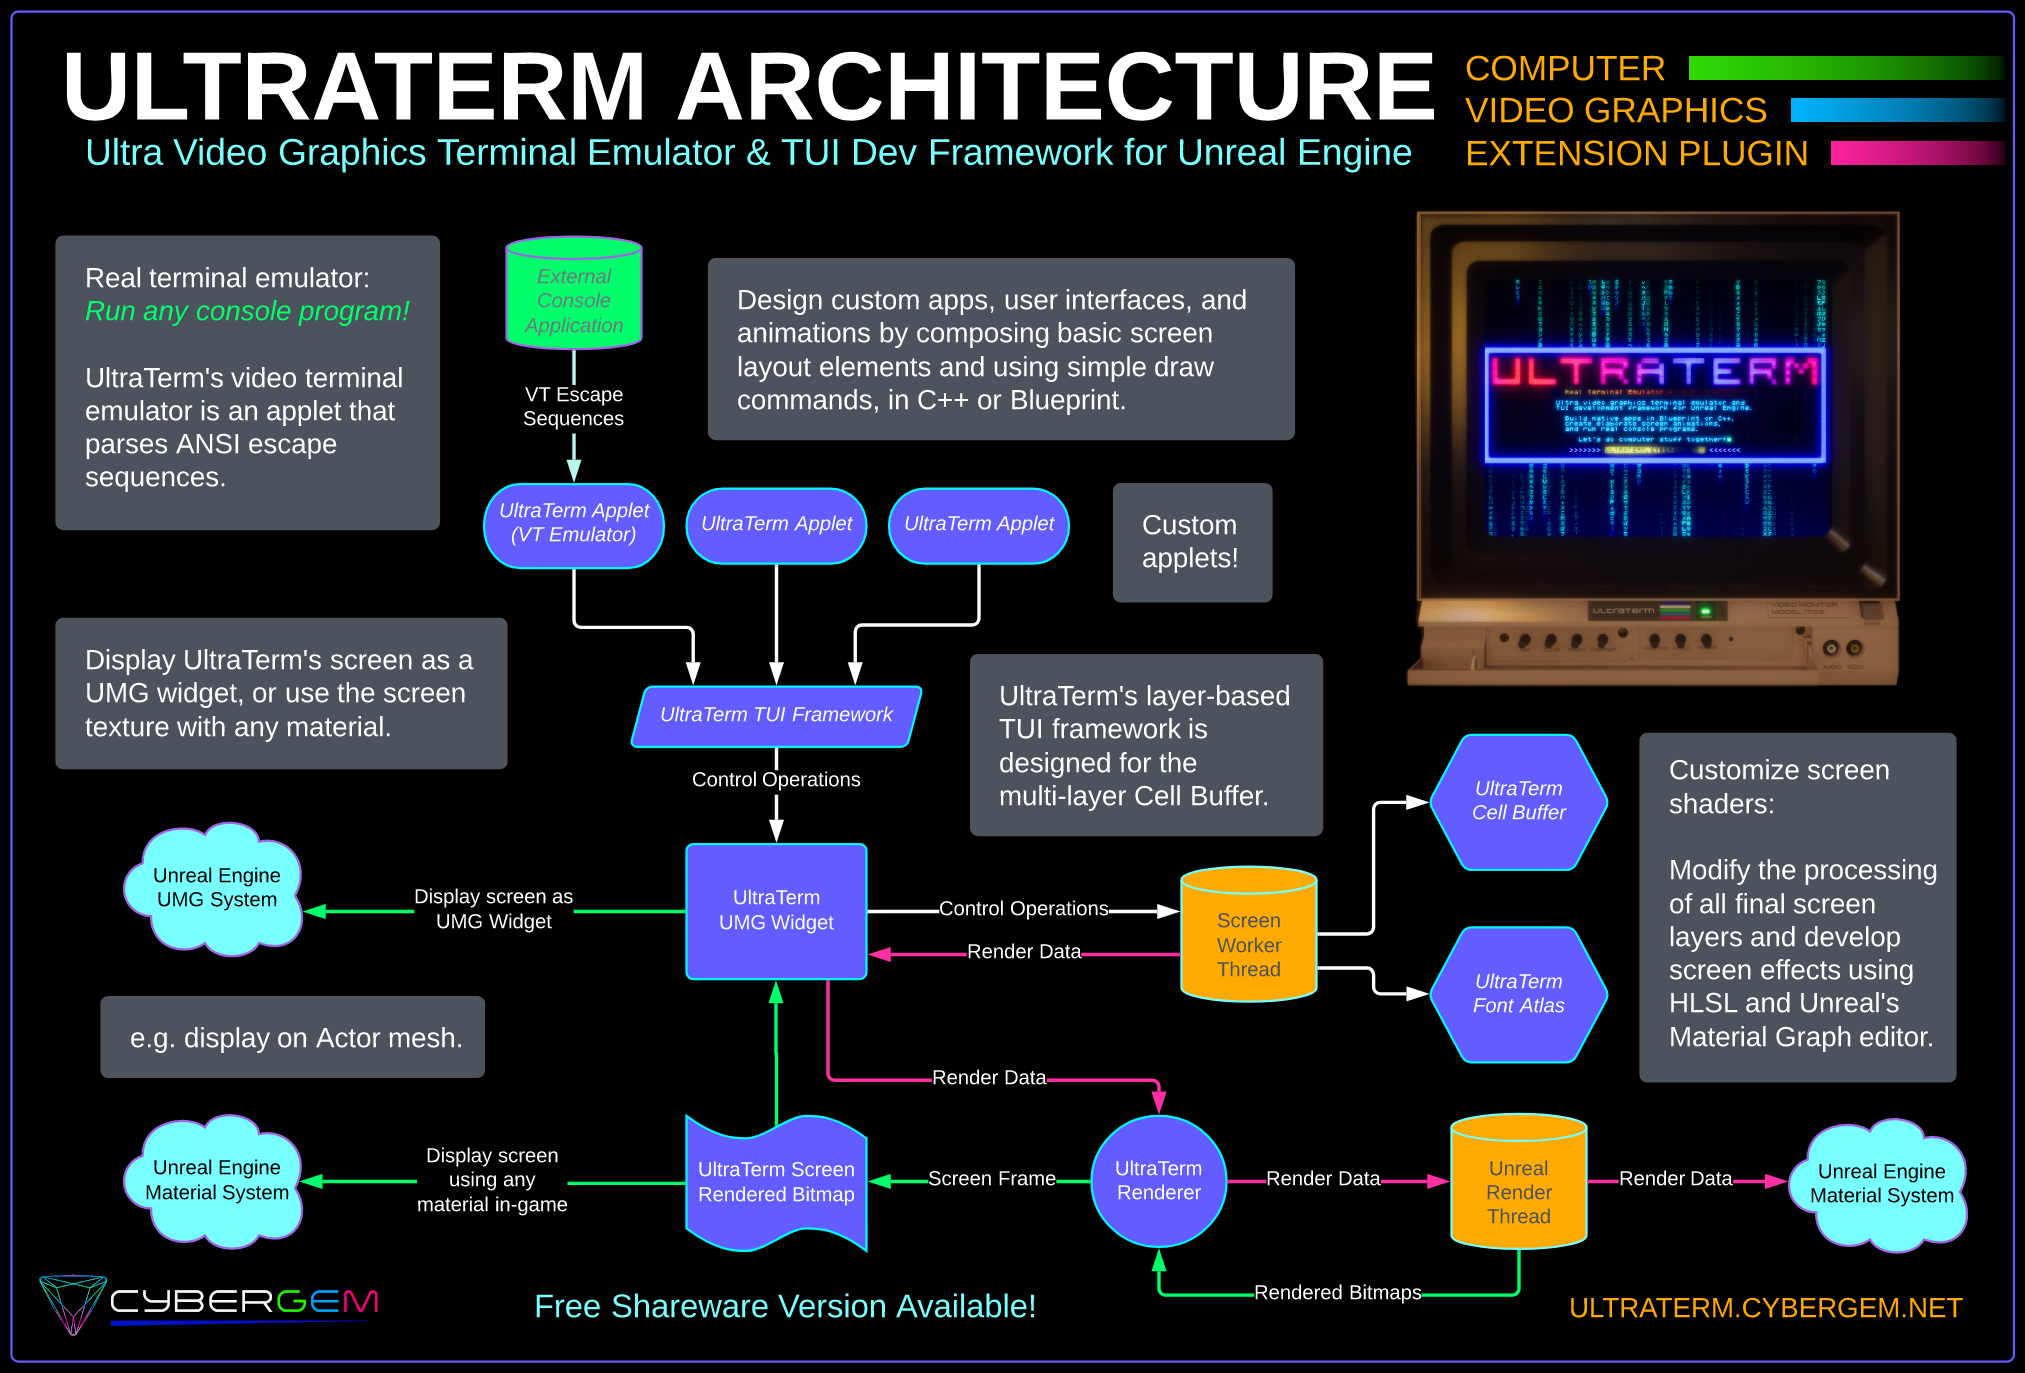 UltraTerm Architecture